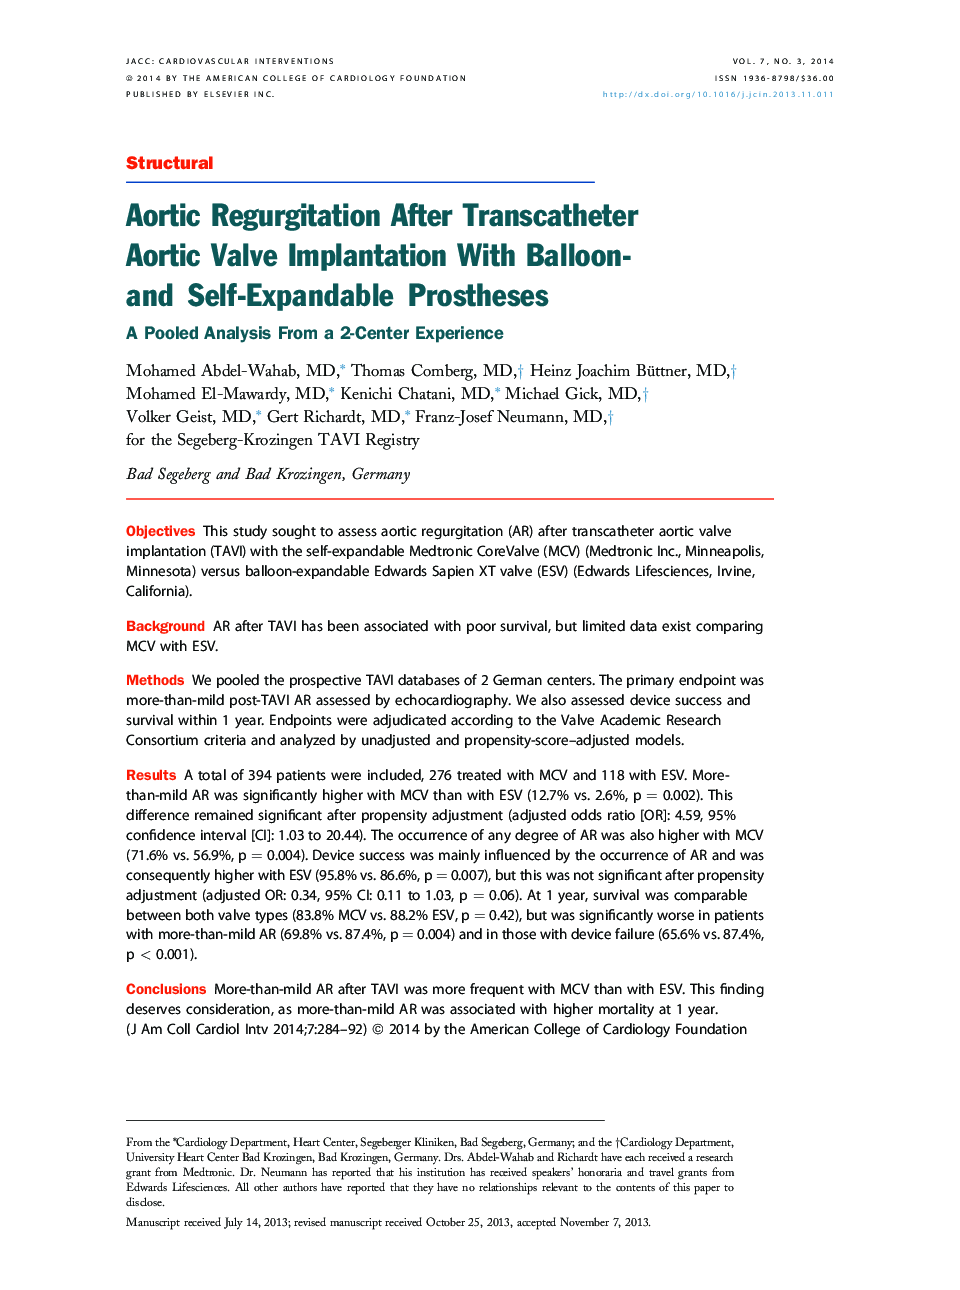 Aortic Regurgitation After Transcatheter Aortic Valve Implantation With Balloon- and Self-Expandable Prostheses : A Pooled Analysis From a 2-Center Experience